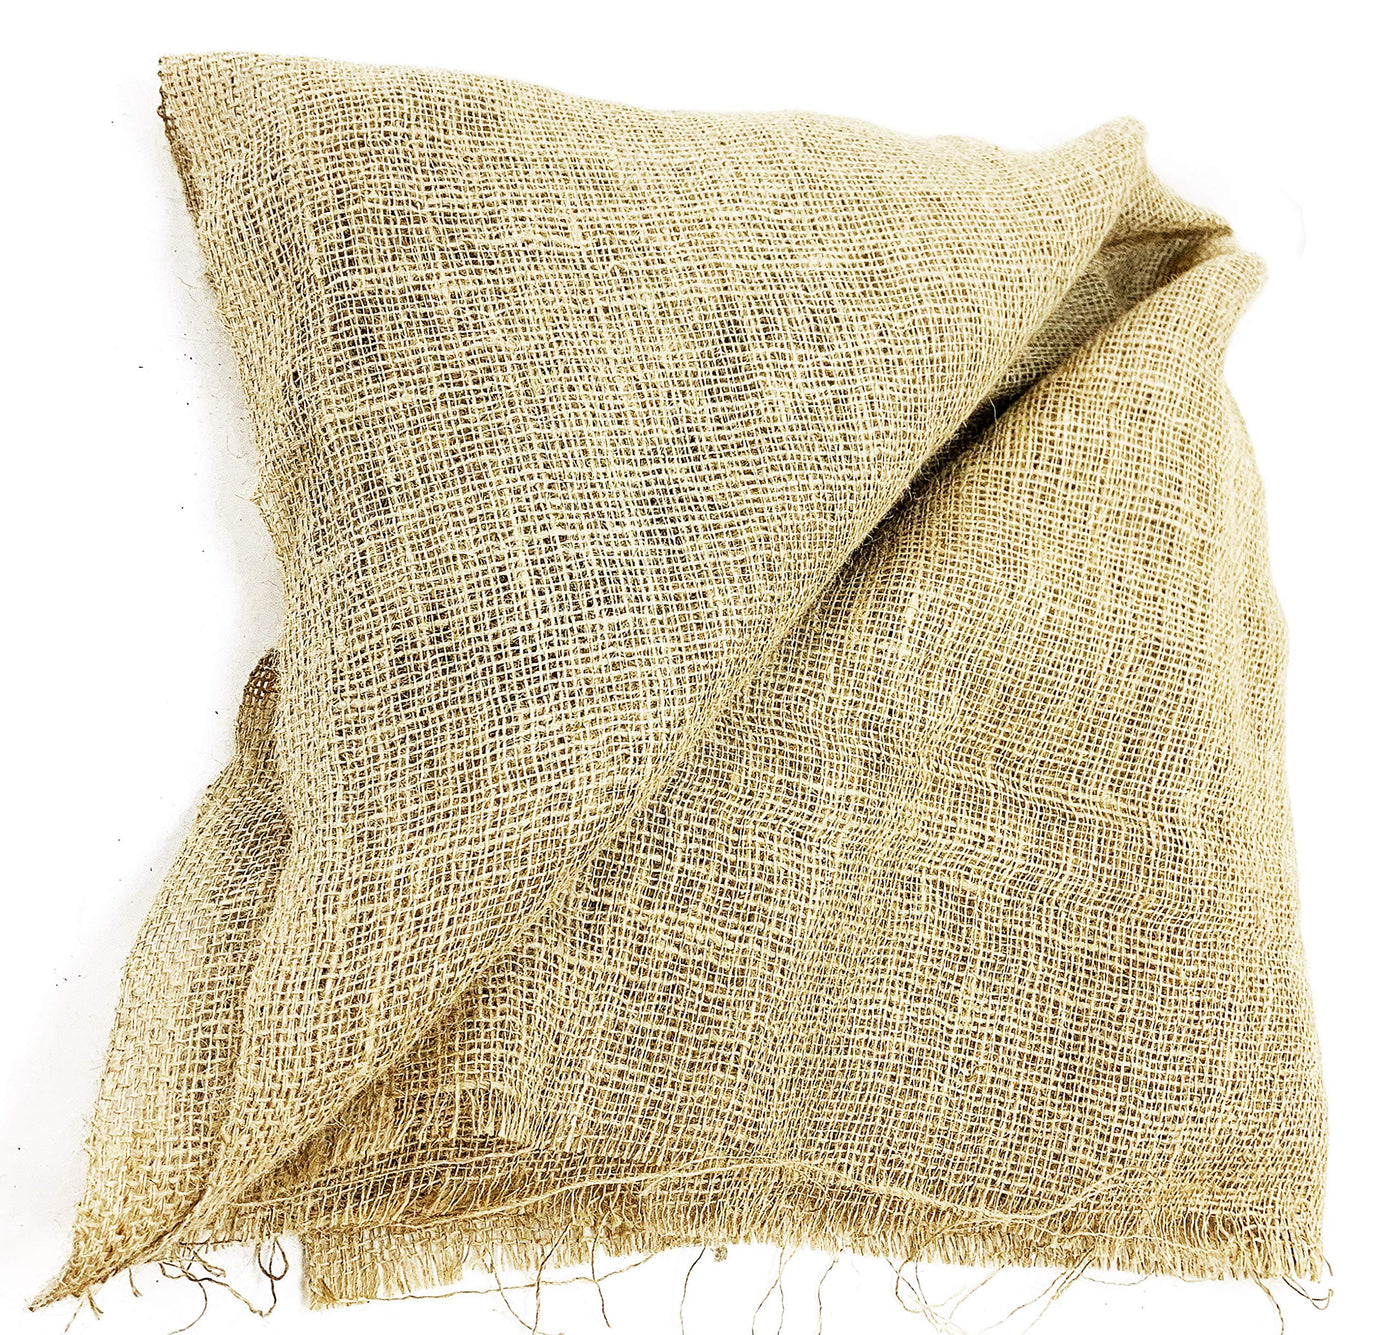 4 Pack 40 inch x 40" Burlap Squares, Light Weight and Loose Weaved Jute- Burlap for Gardening Supplies, planters , 44 Square feet Raised Bed Liner